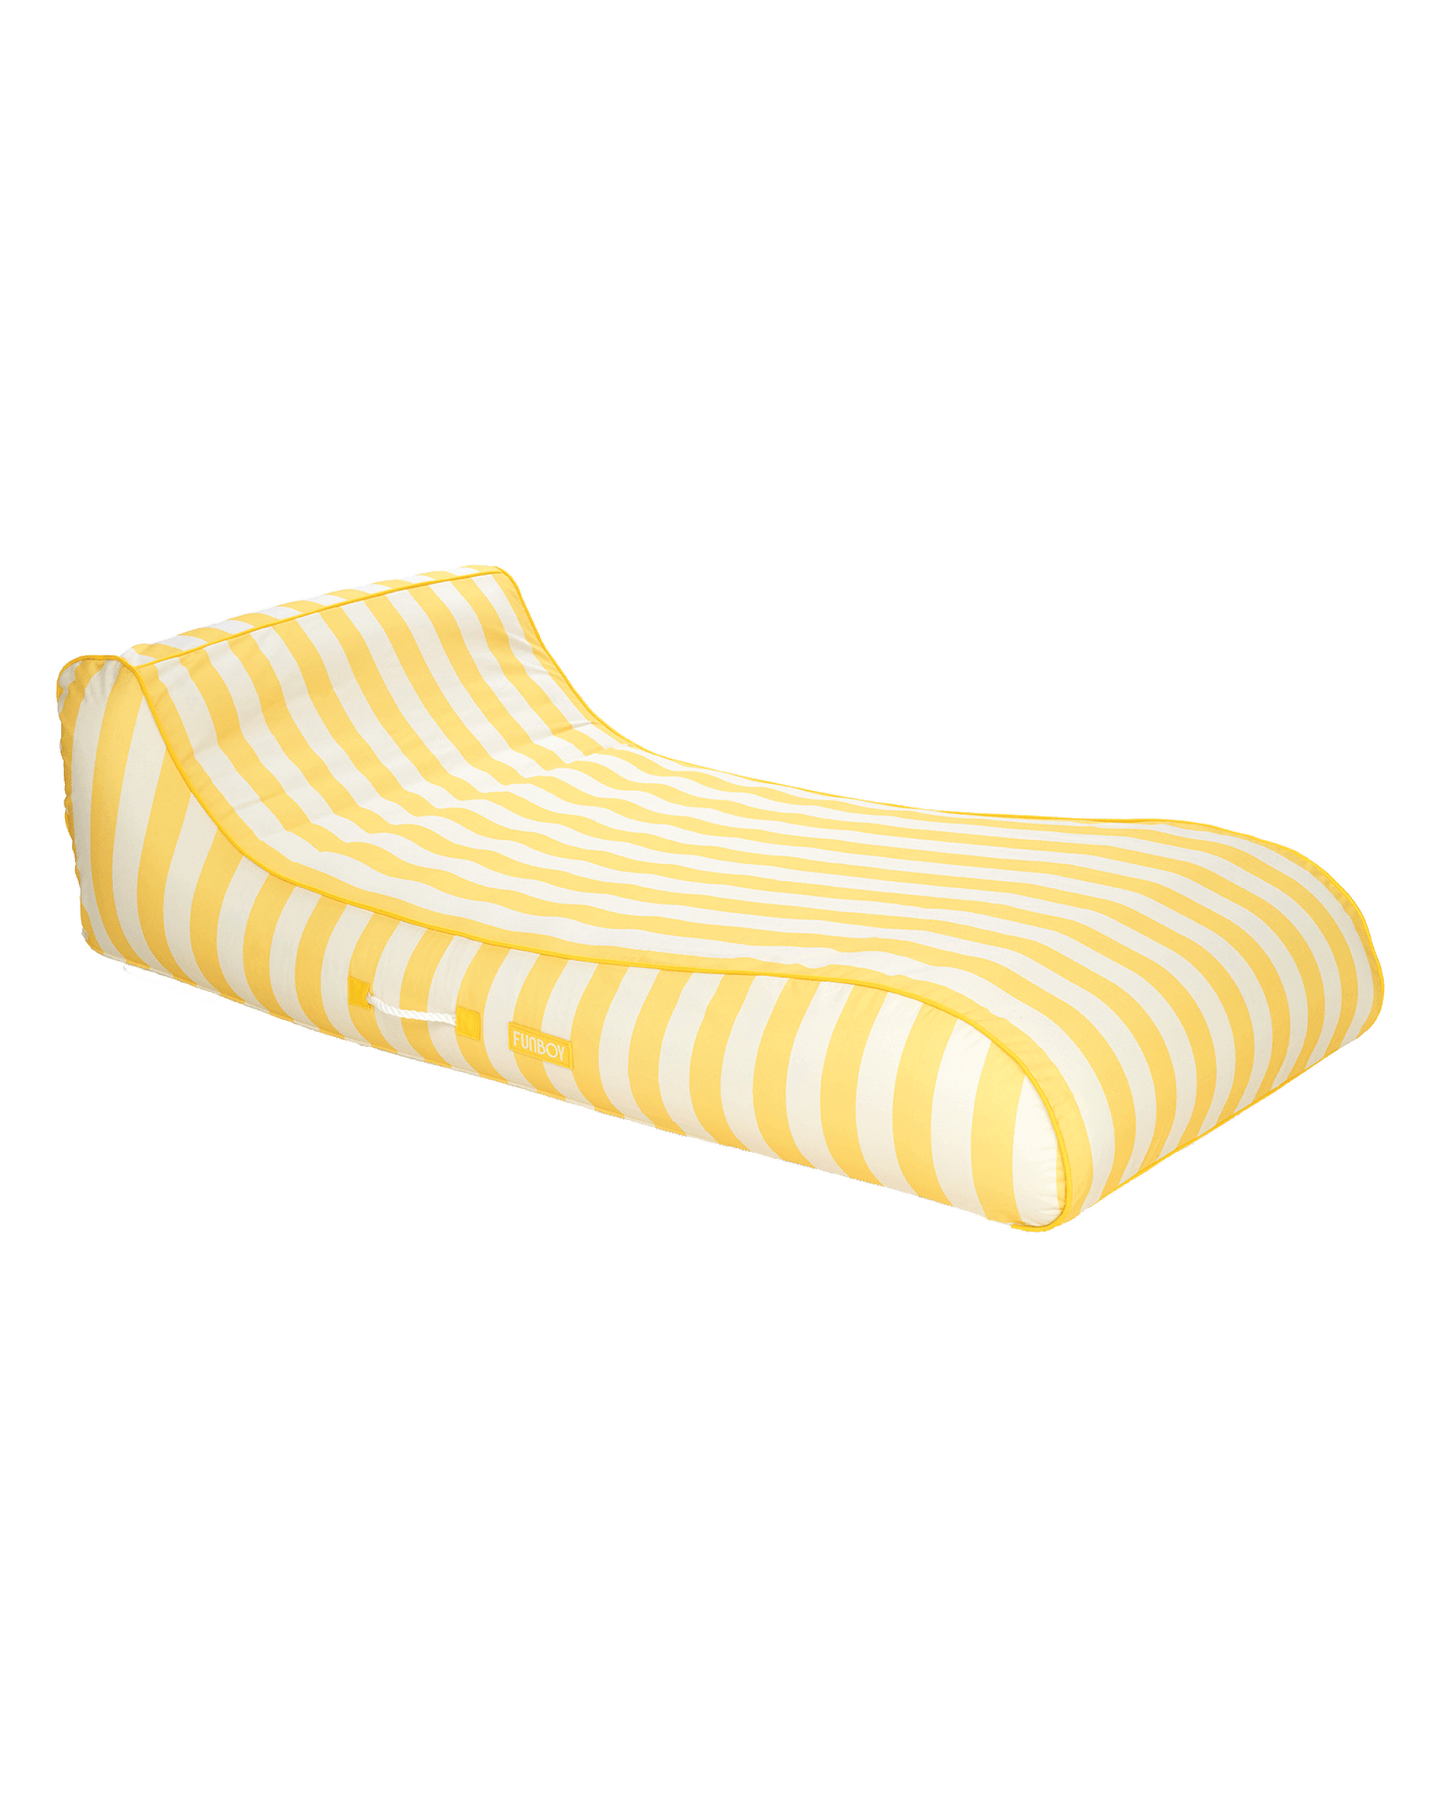 Fabric Colored Pool Float - Yellow Cabana Stripe Lounger